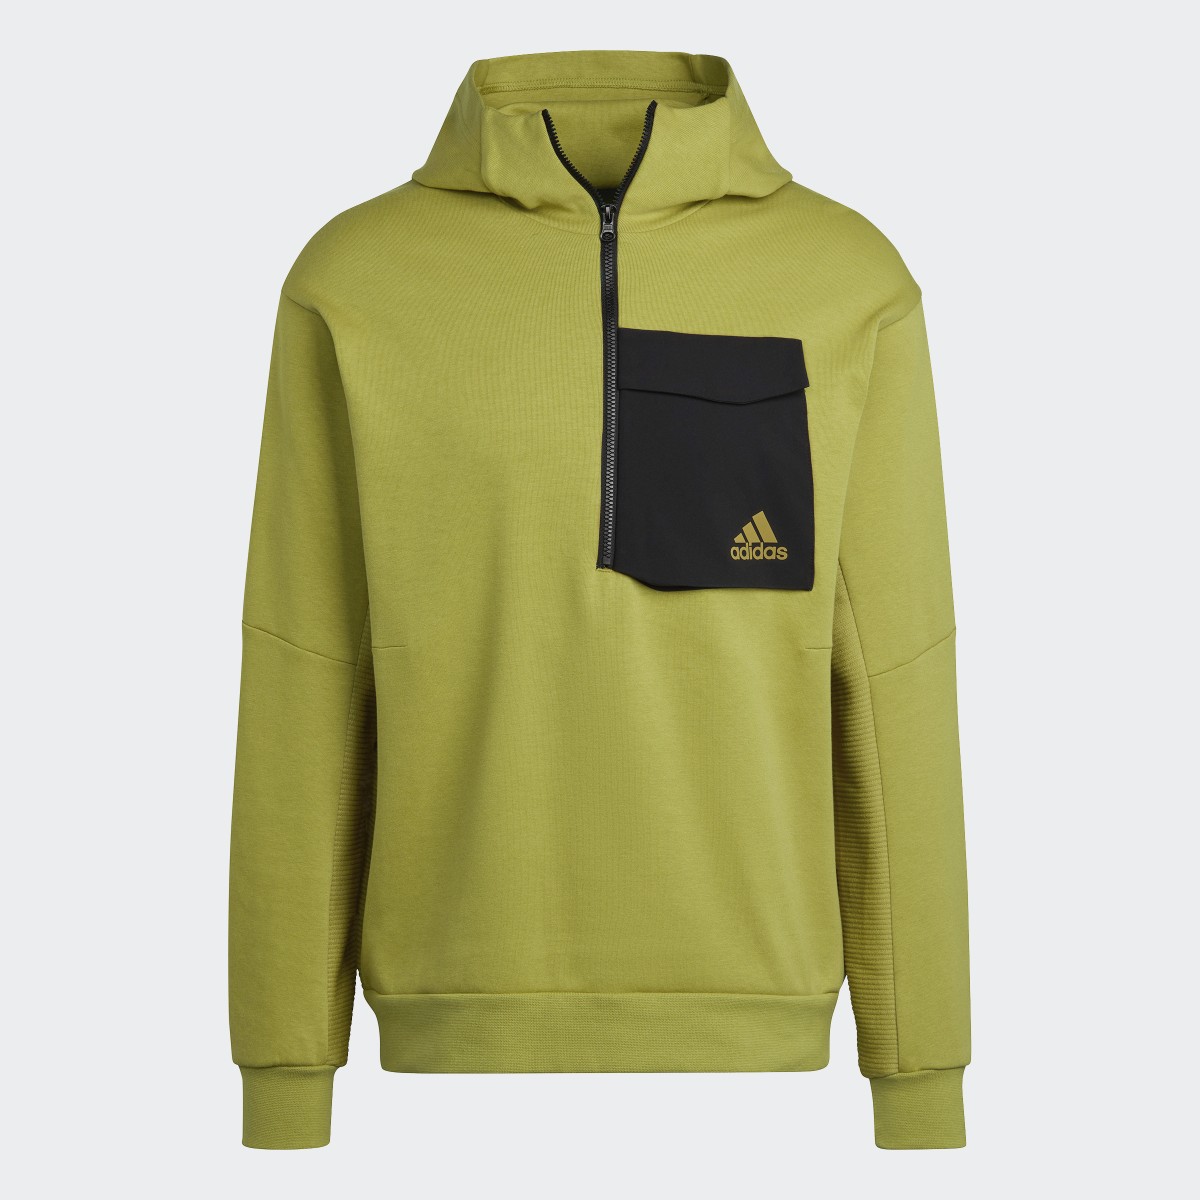 Adidas Designed for Gameday Hoodie. 5